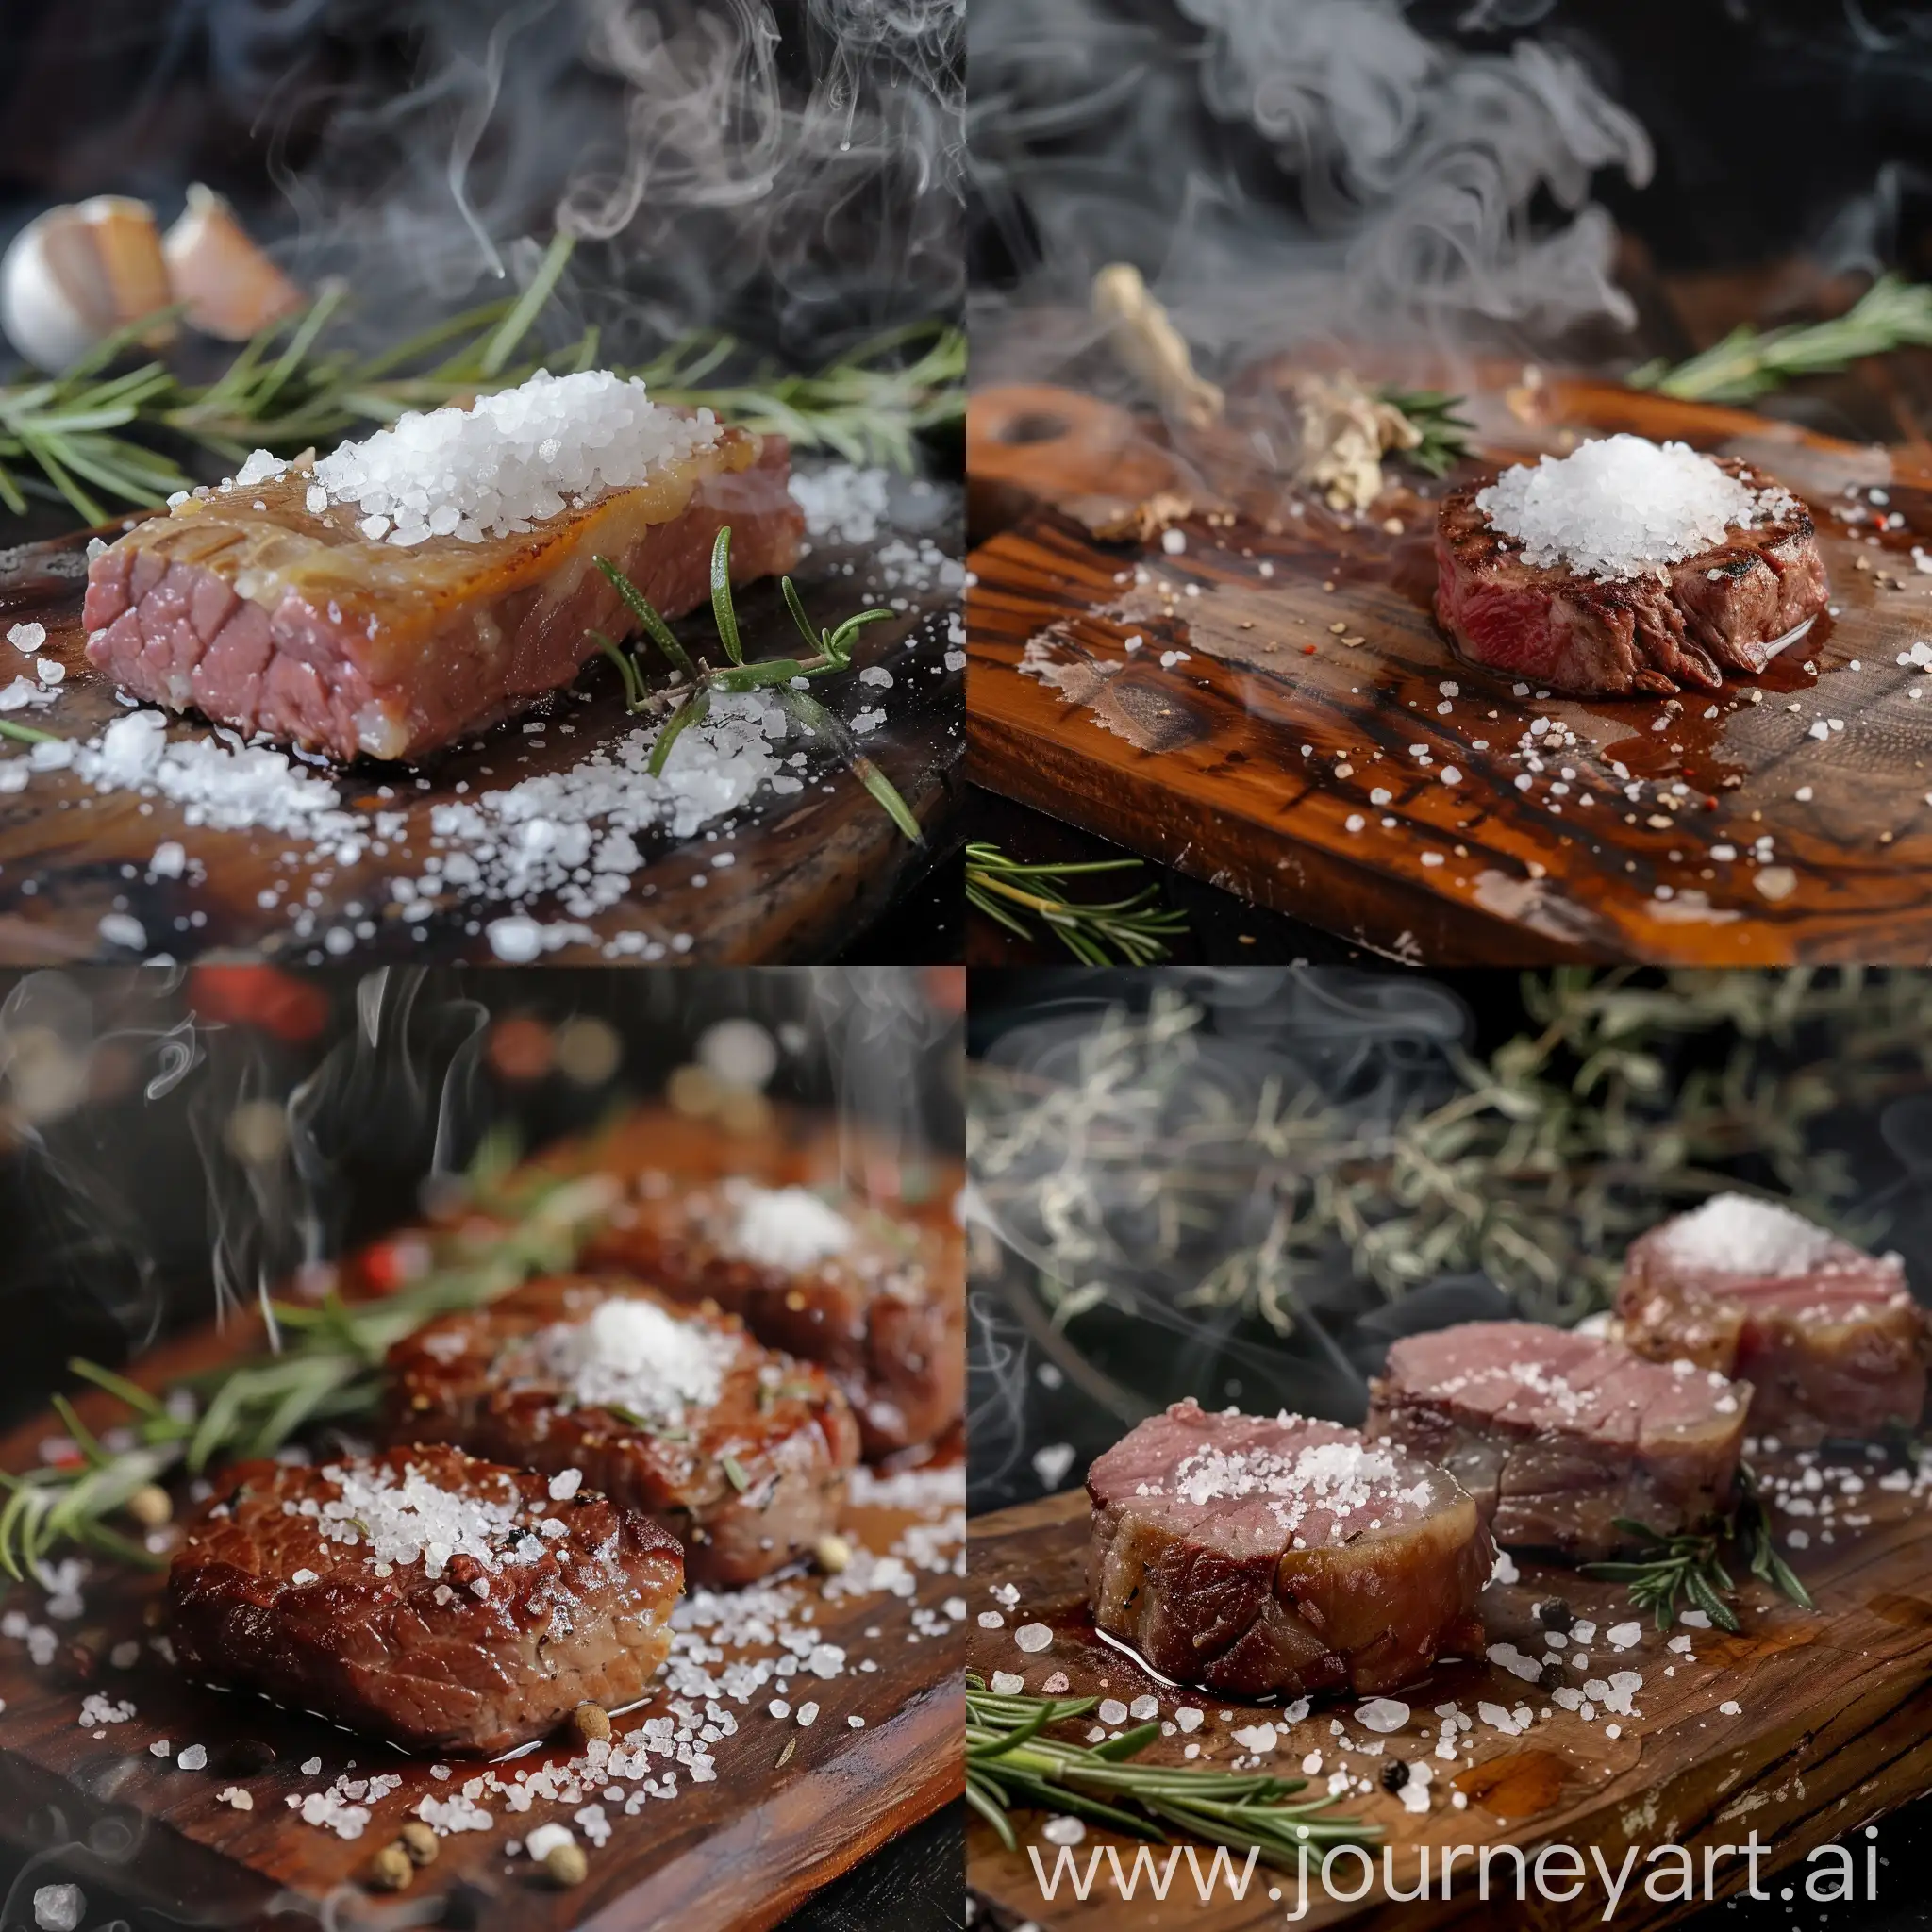 Medium-Rare-Steak-on-Wooden-Board-with-Rosemary-and-Coarse-Salt